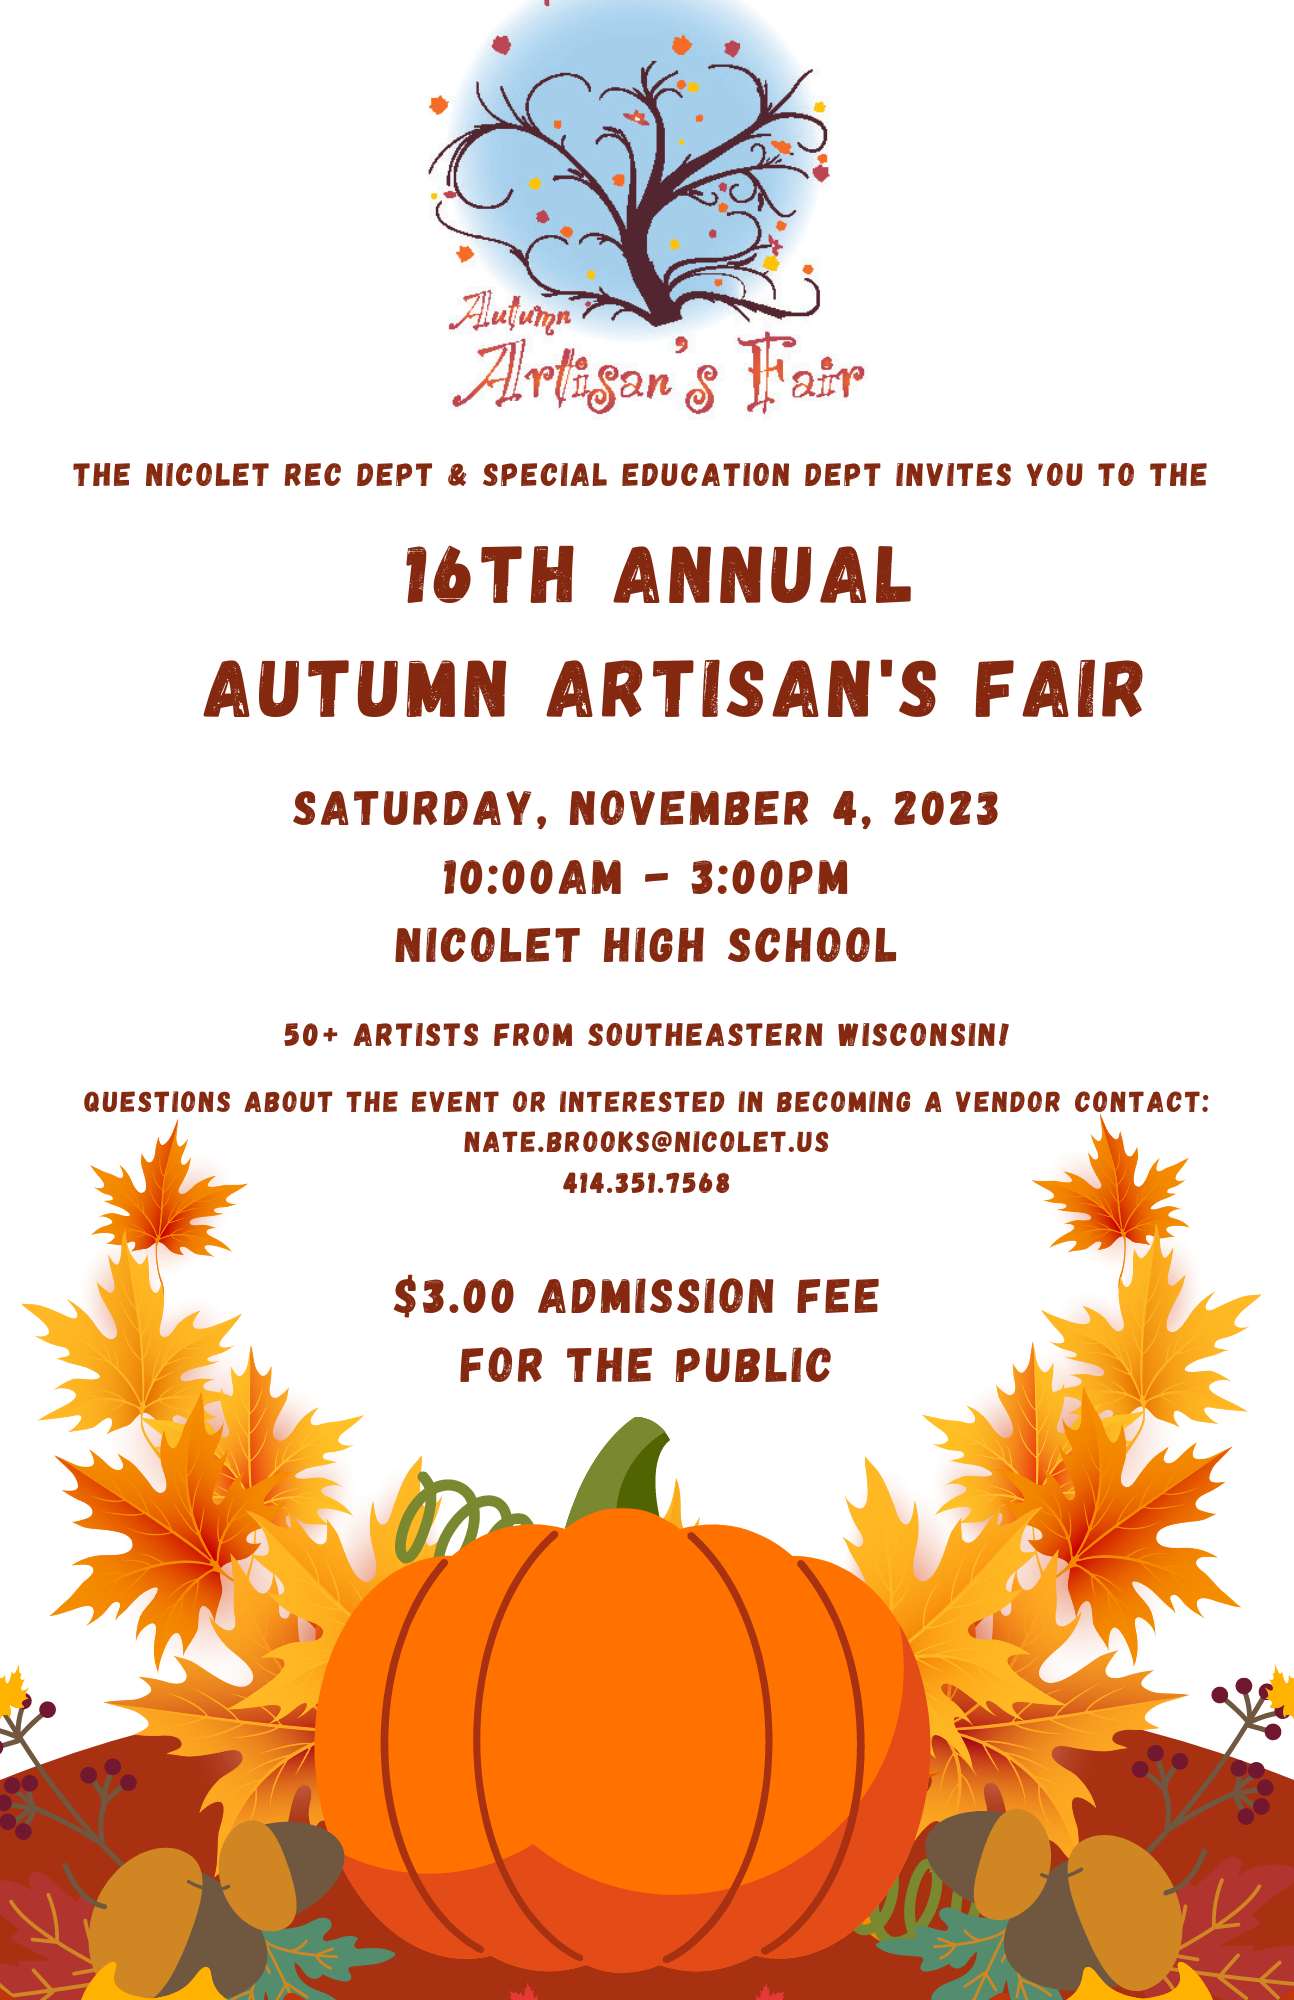 graphic of Autumn Artisan's Fair that takes place on November 4, 2023 from 10am - 3pm